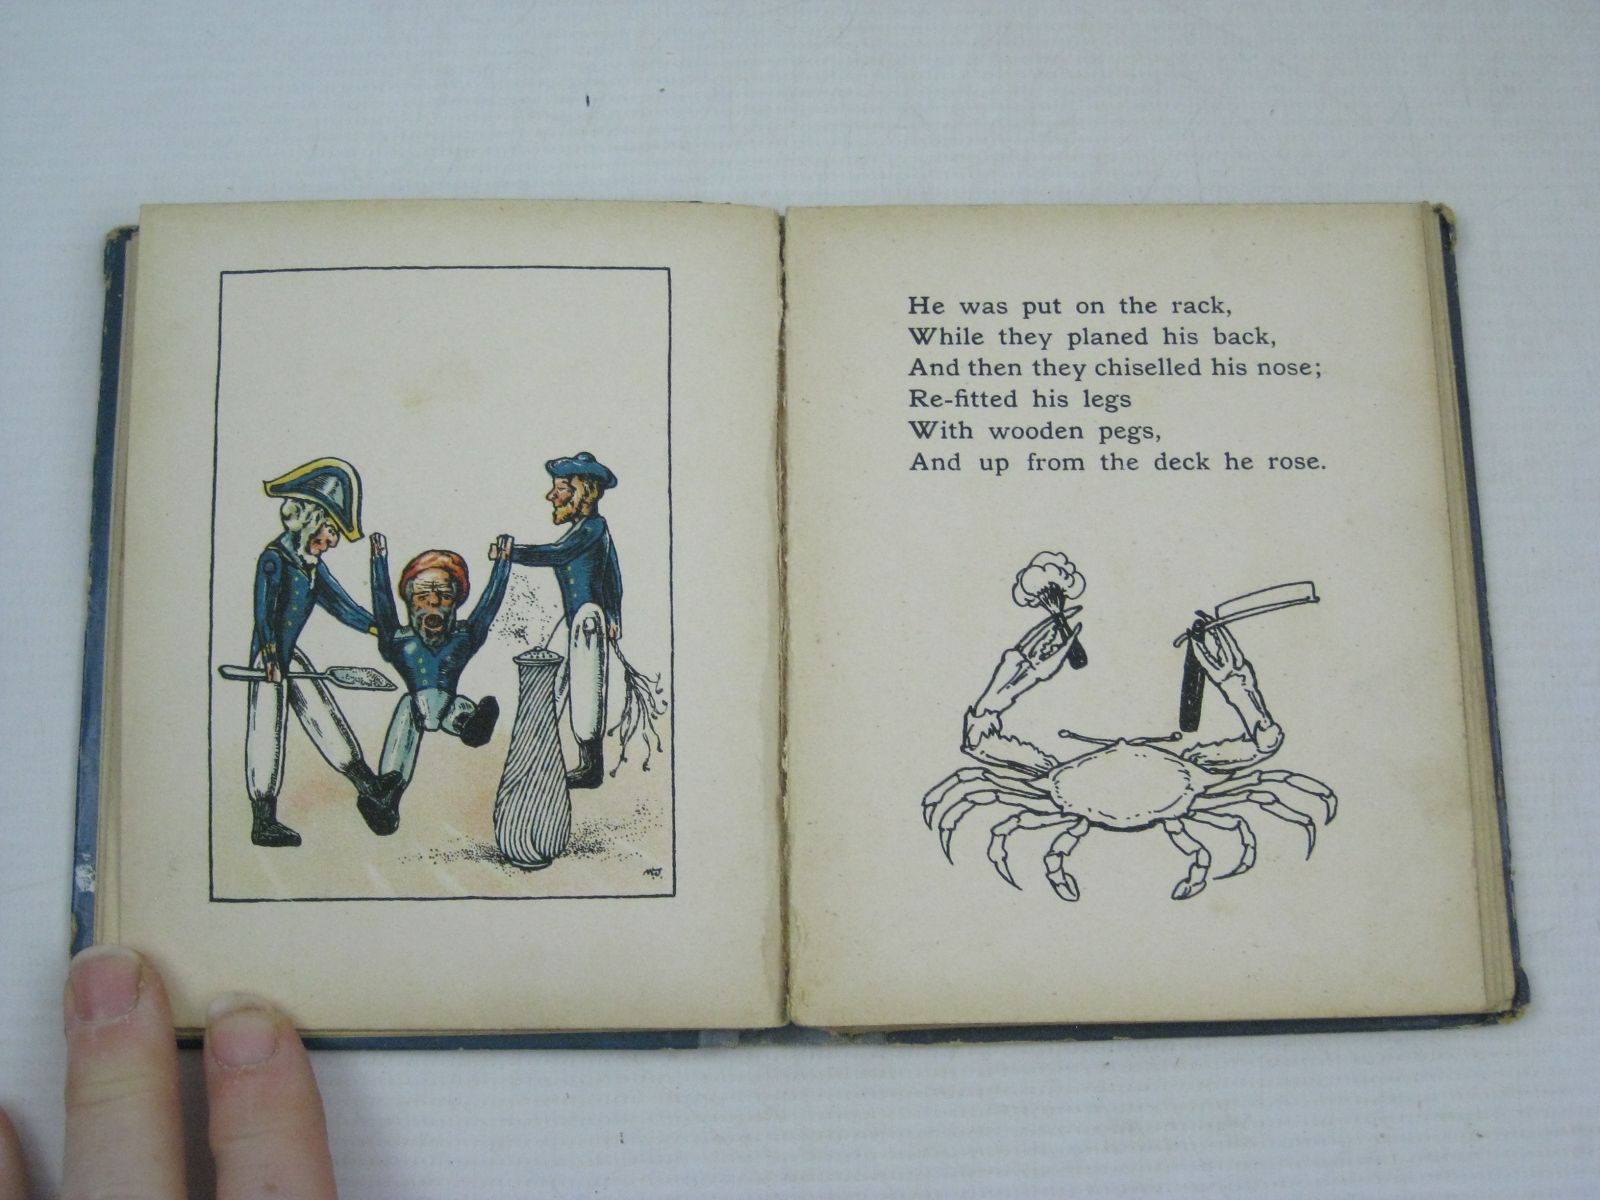 Photo of JOLLY TARS written by Jamieson, M.M. illustrated by Jamieson, M.M. published by Ernest Nister (STOCK CODE: 1405092)  for sale by Stella & Rose's Books